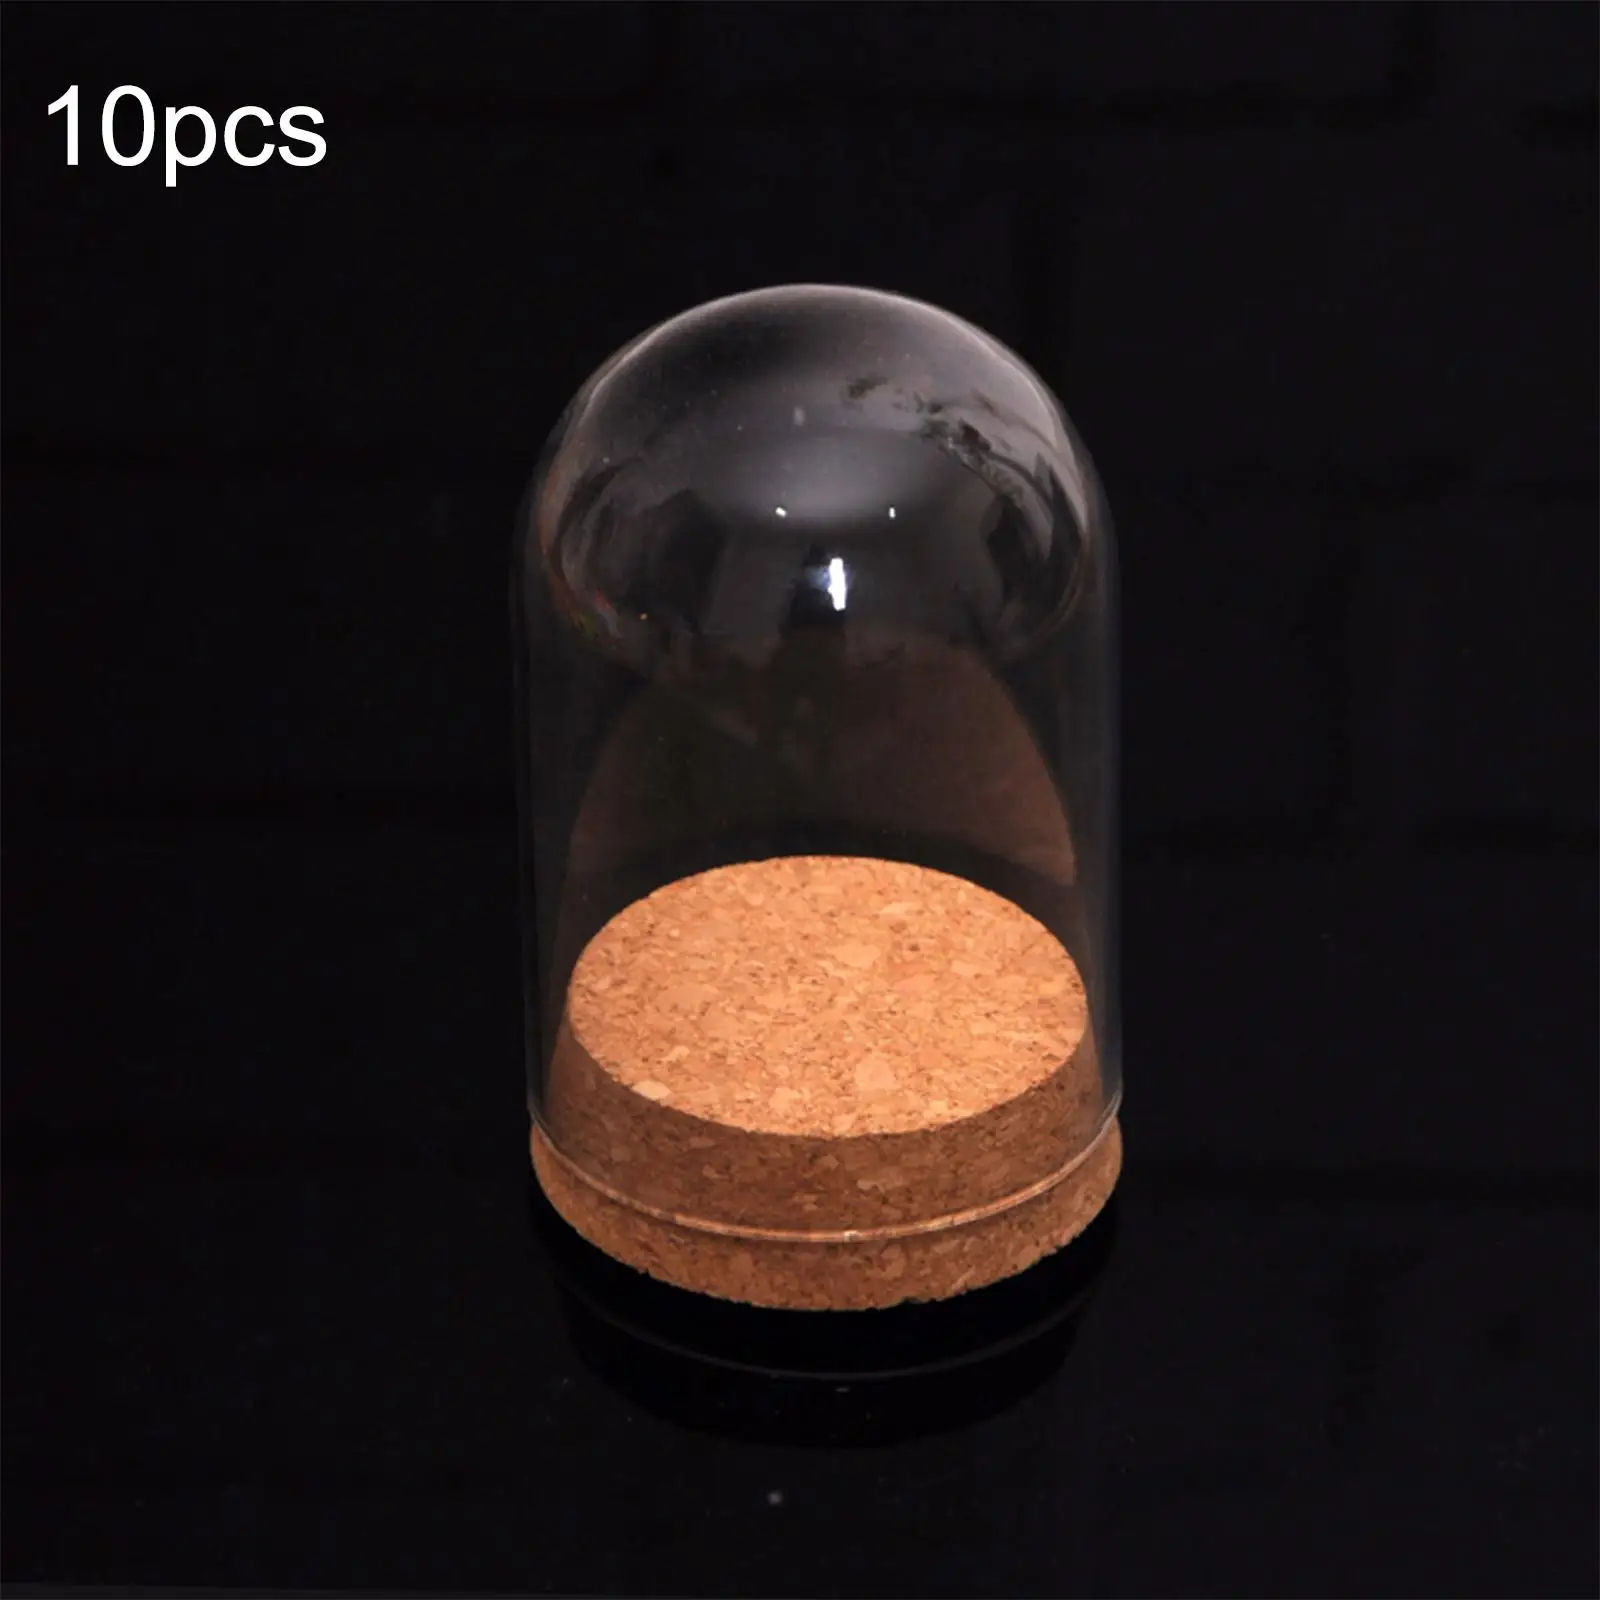 10x Transparent Display Dome with Base Home Decoration Tabletop Decor DIY Crafts Birthday Gift Dustproof Glass Cloche Cover